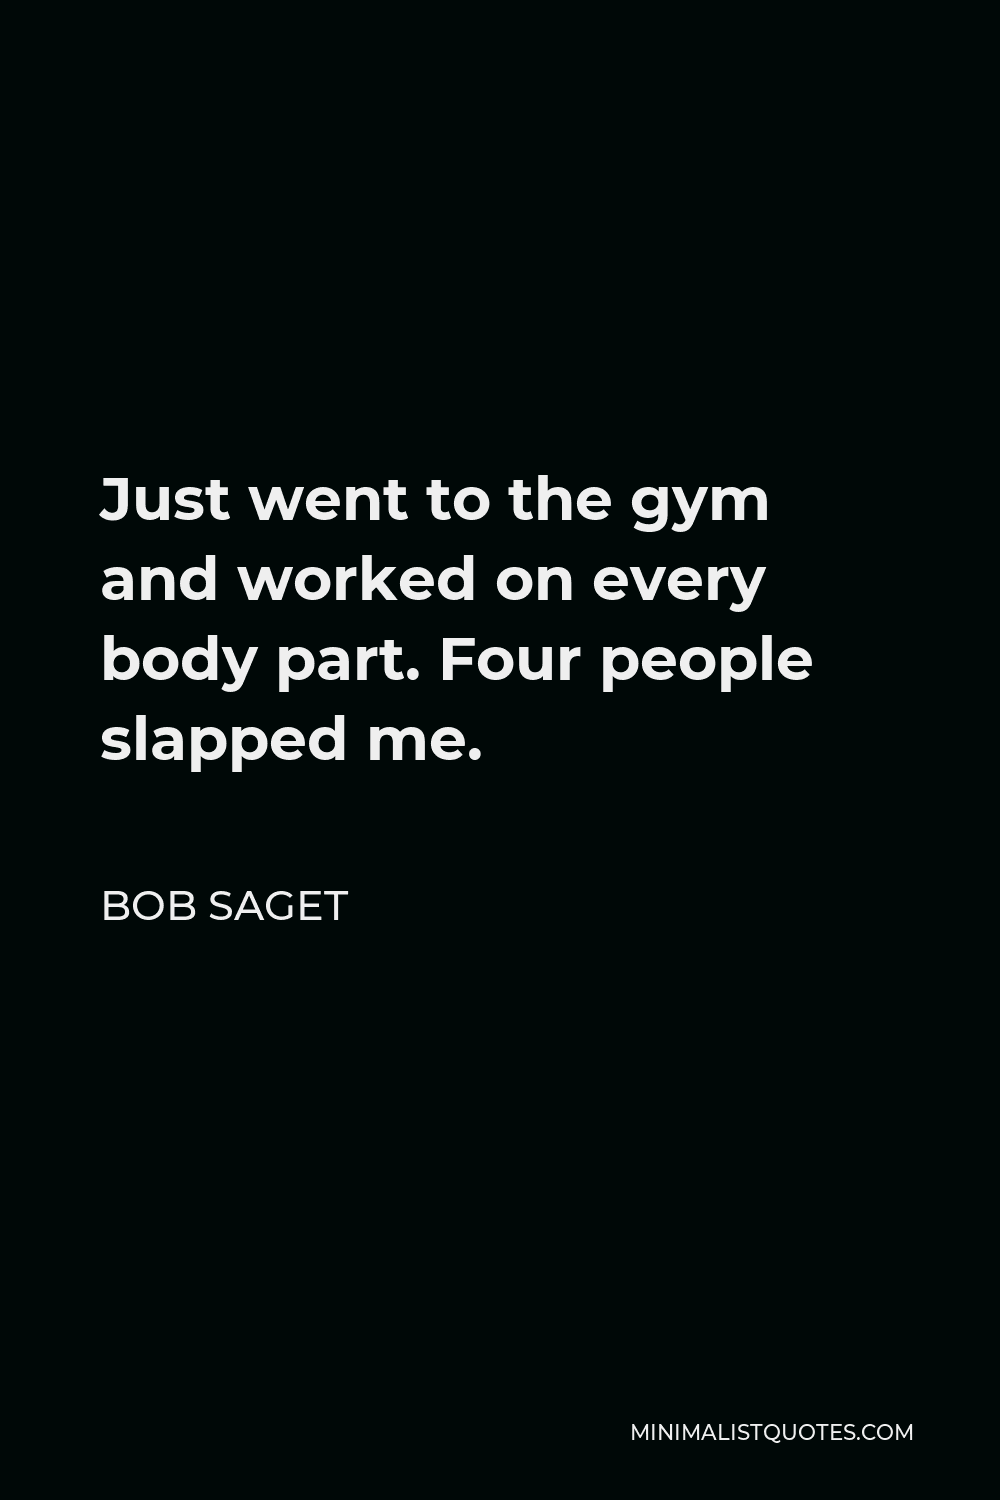 Bob Saget Quote - Just went to the gym and worked on every body part. Four people slapped me.